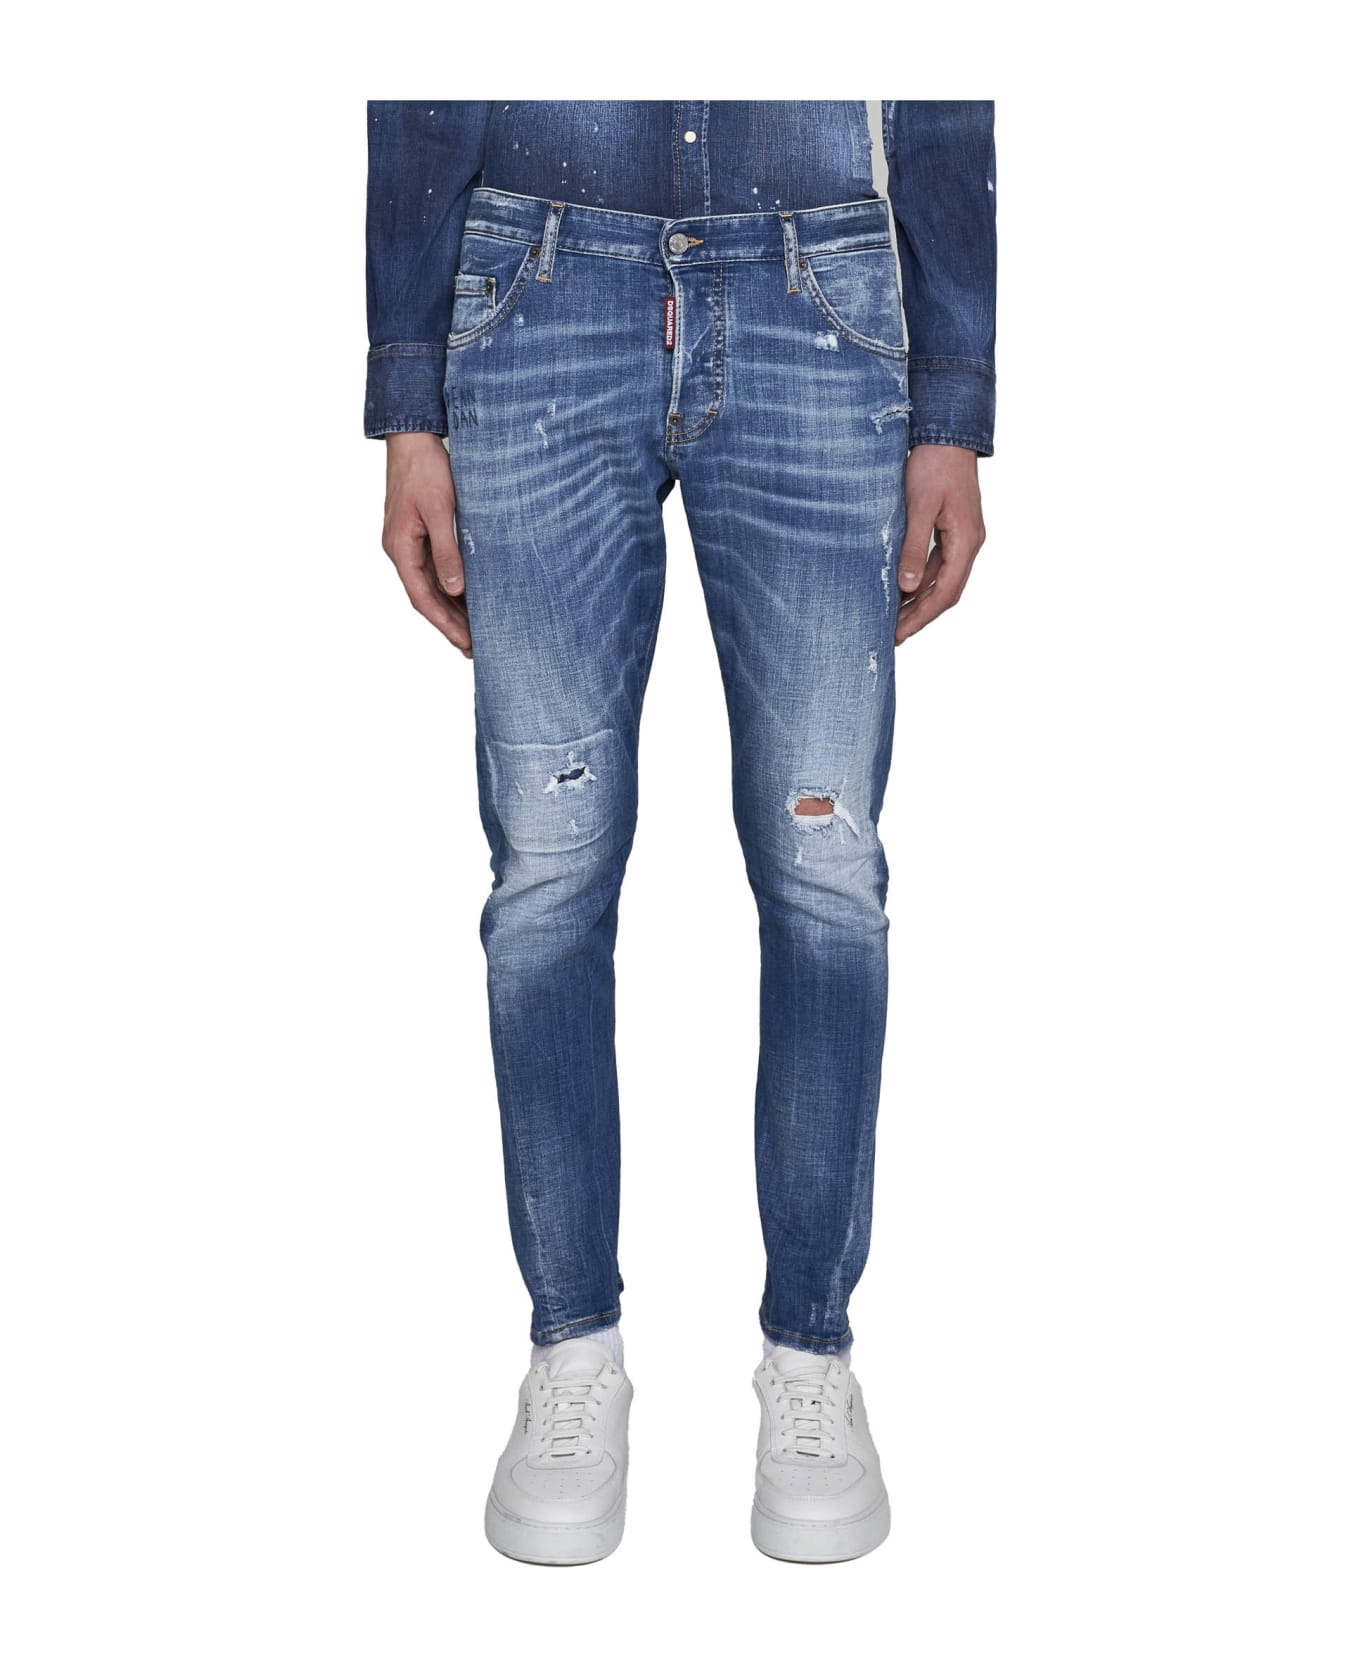 Dsquared2 Sexy Twist Jeans - Navy Blue